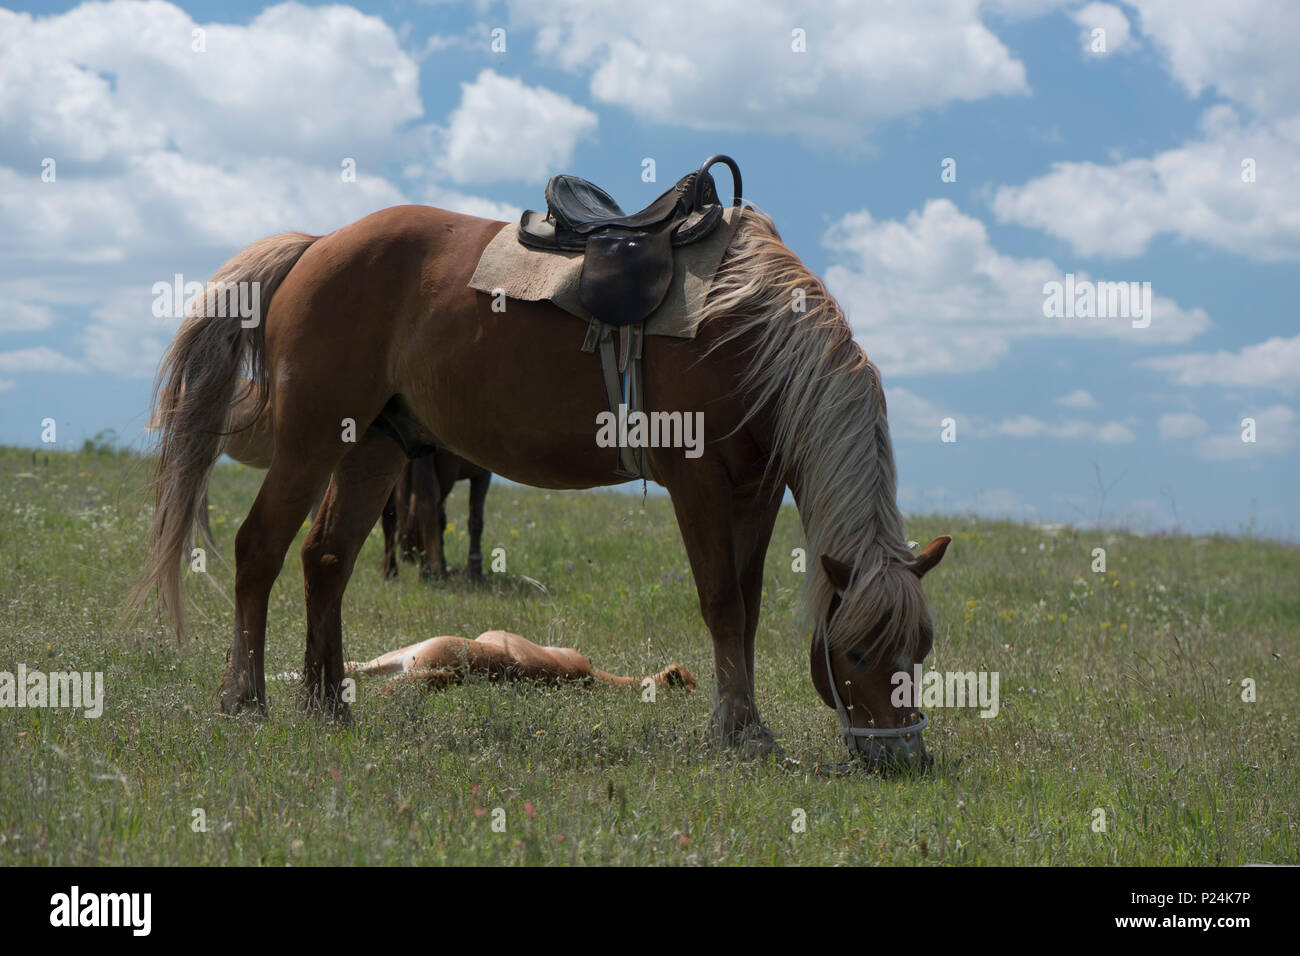 the bay horse with a foal who is grazed on a meadow Stock Photo